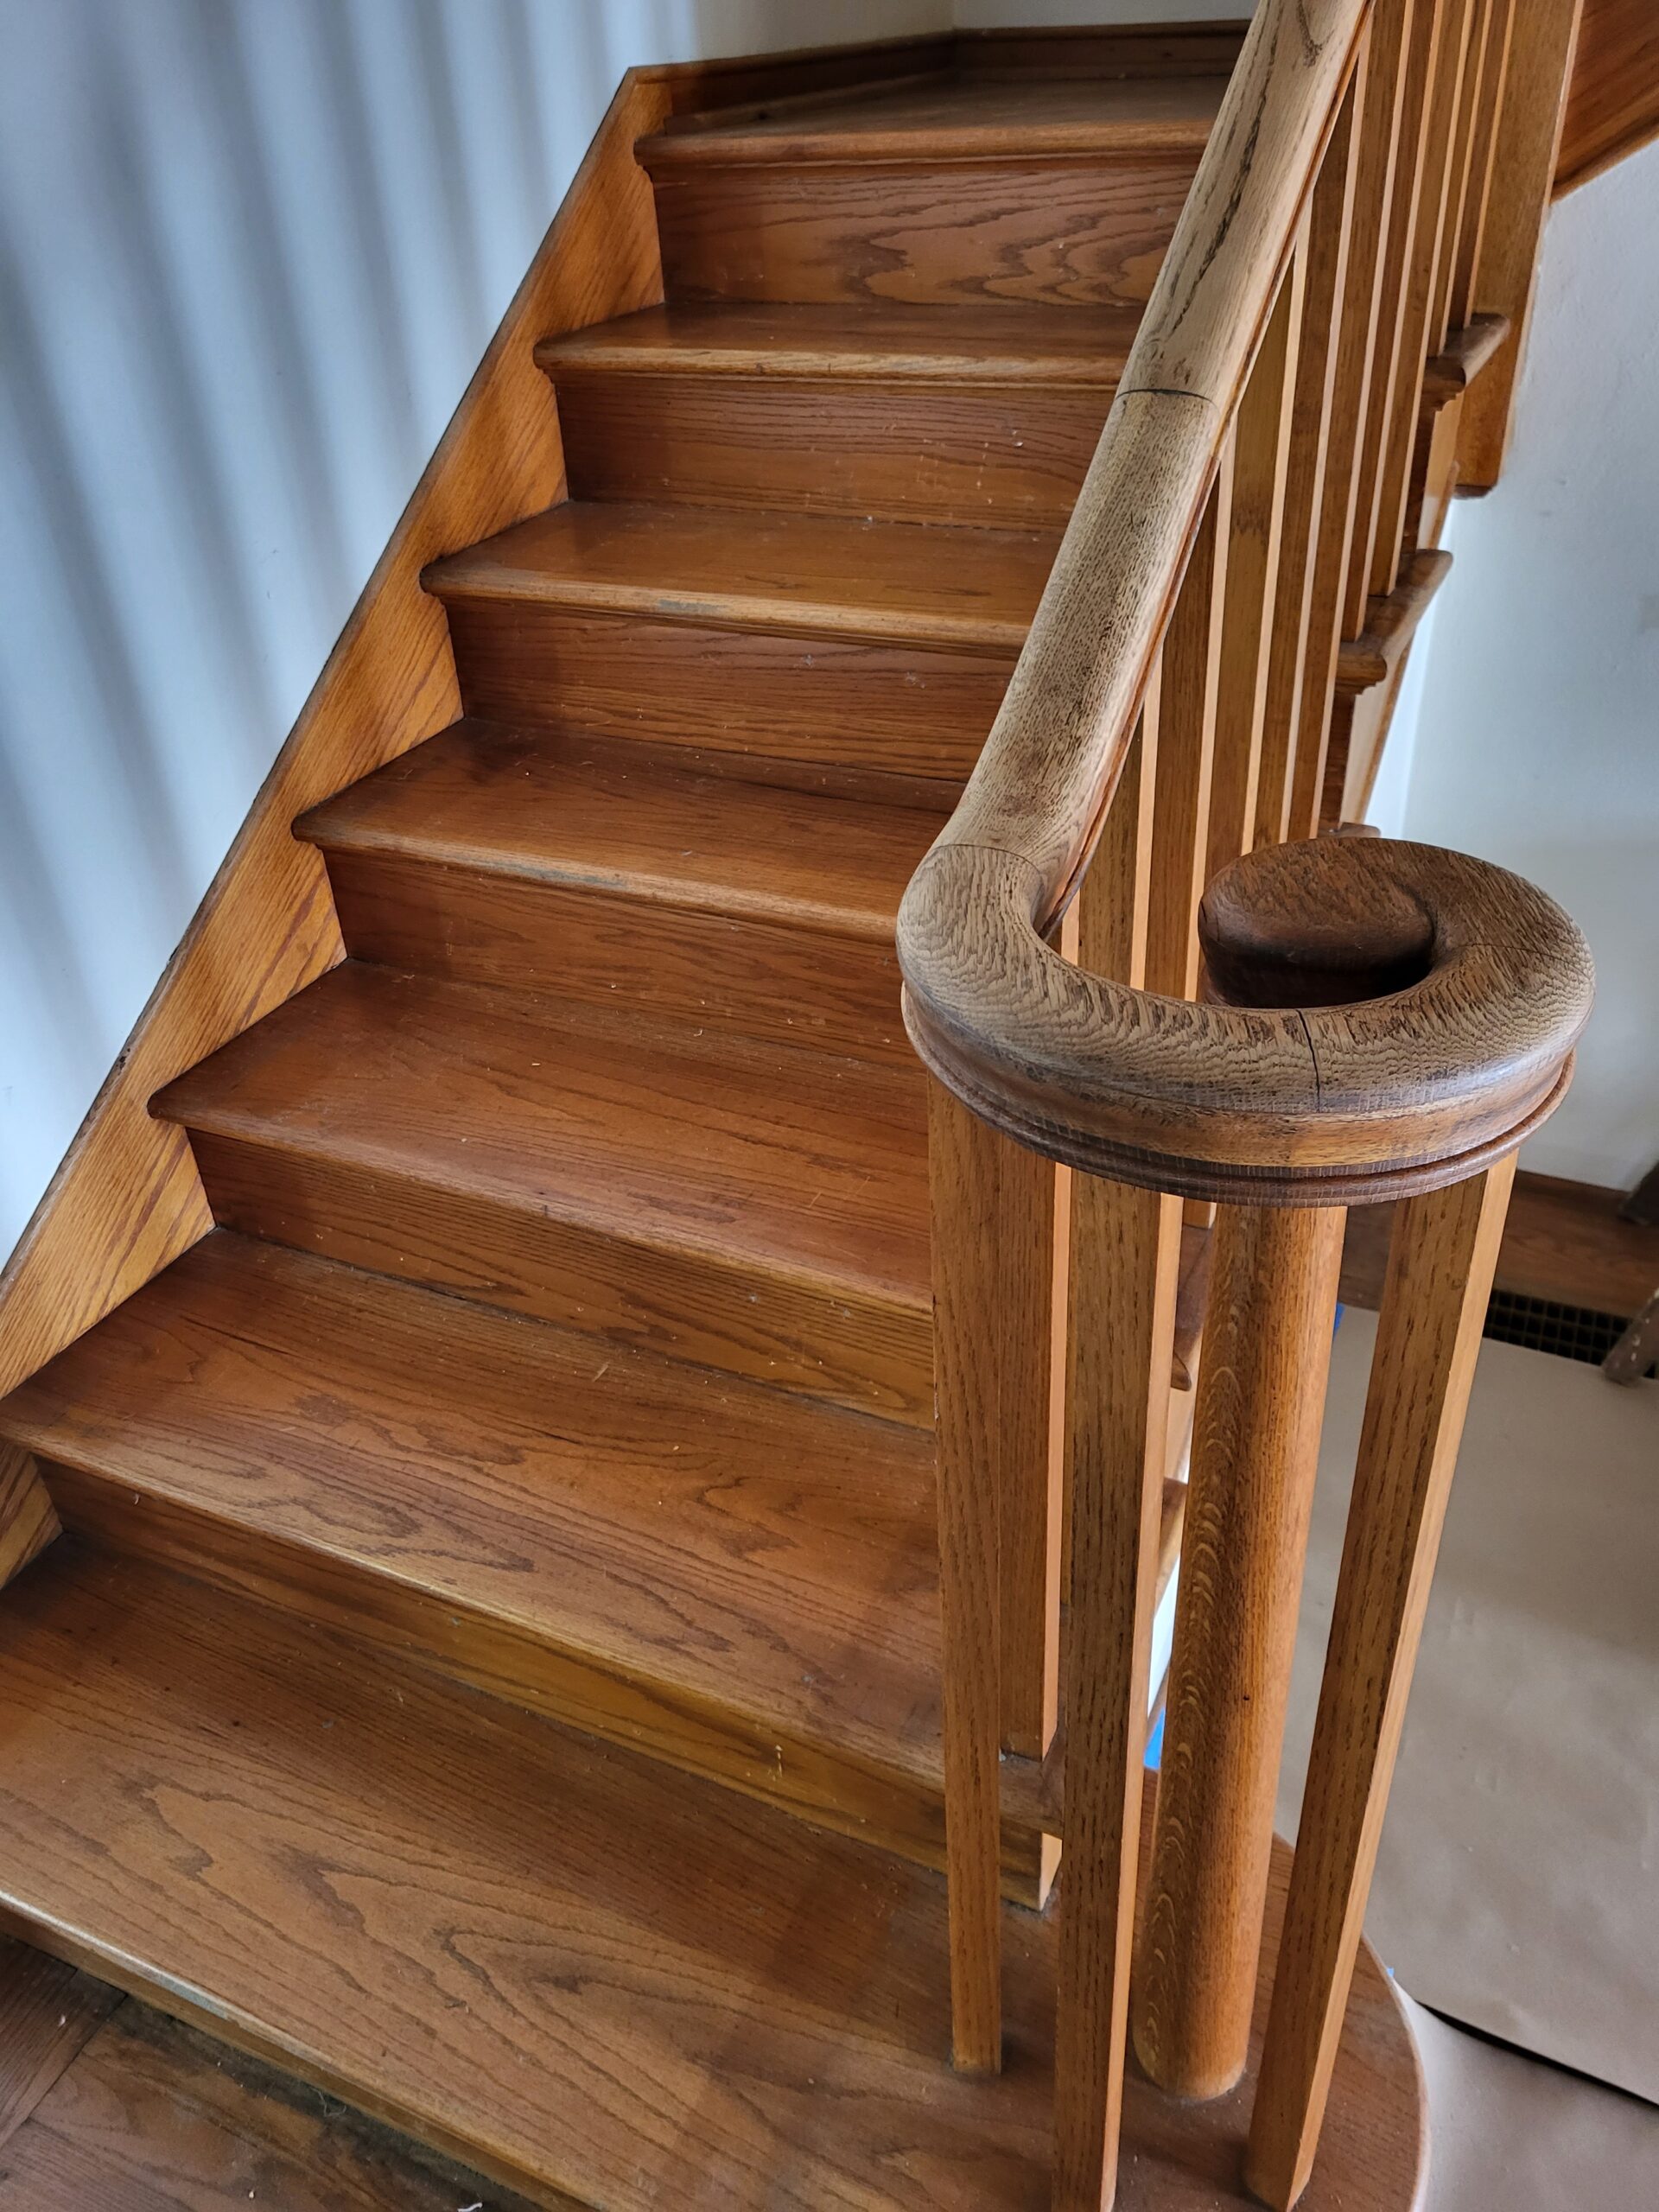 White oak stairs and handrail... stain and refinishing in Los Altos Hills, residential.